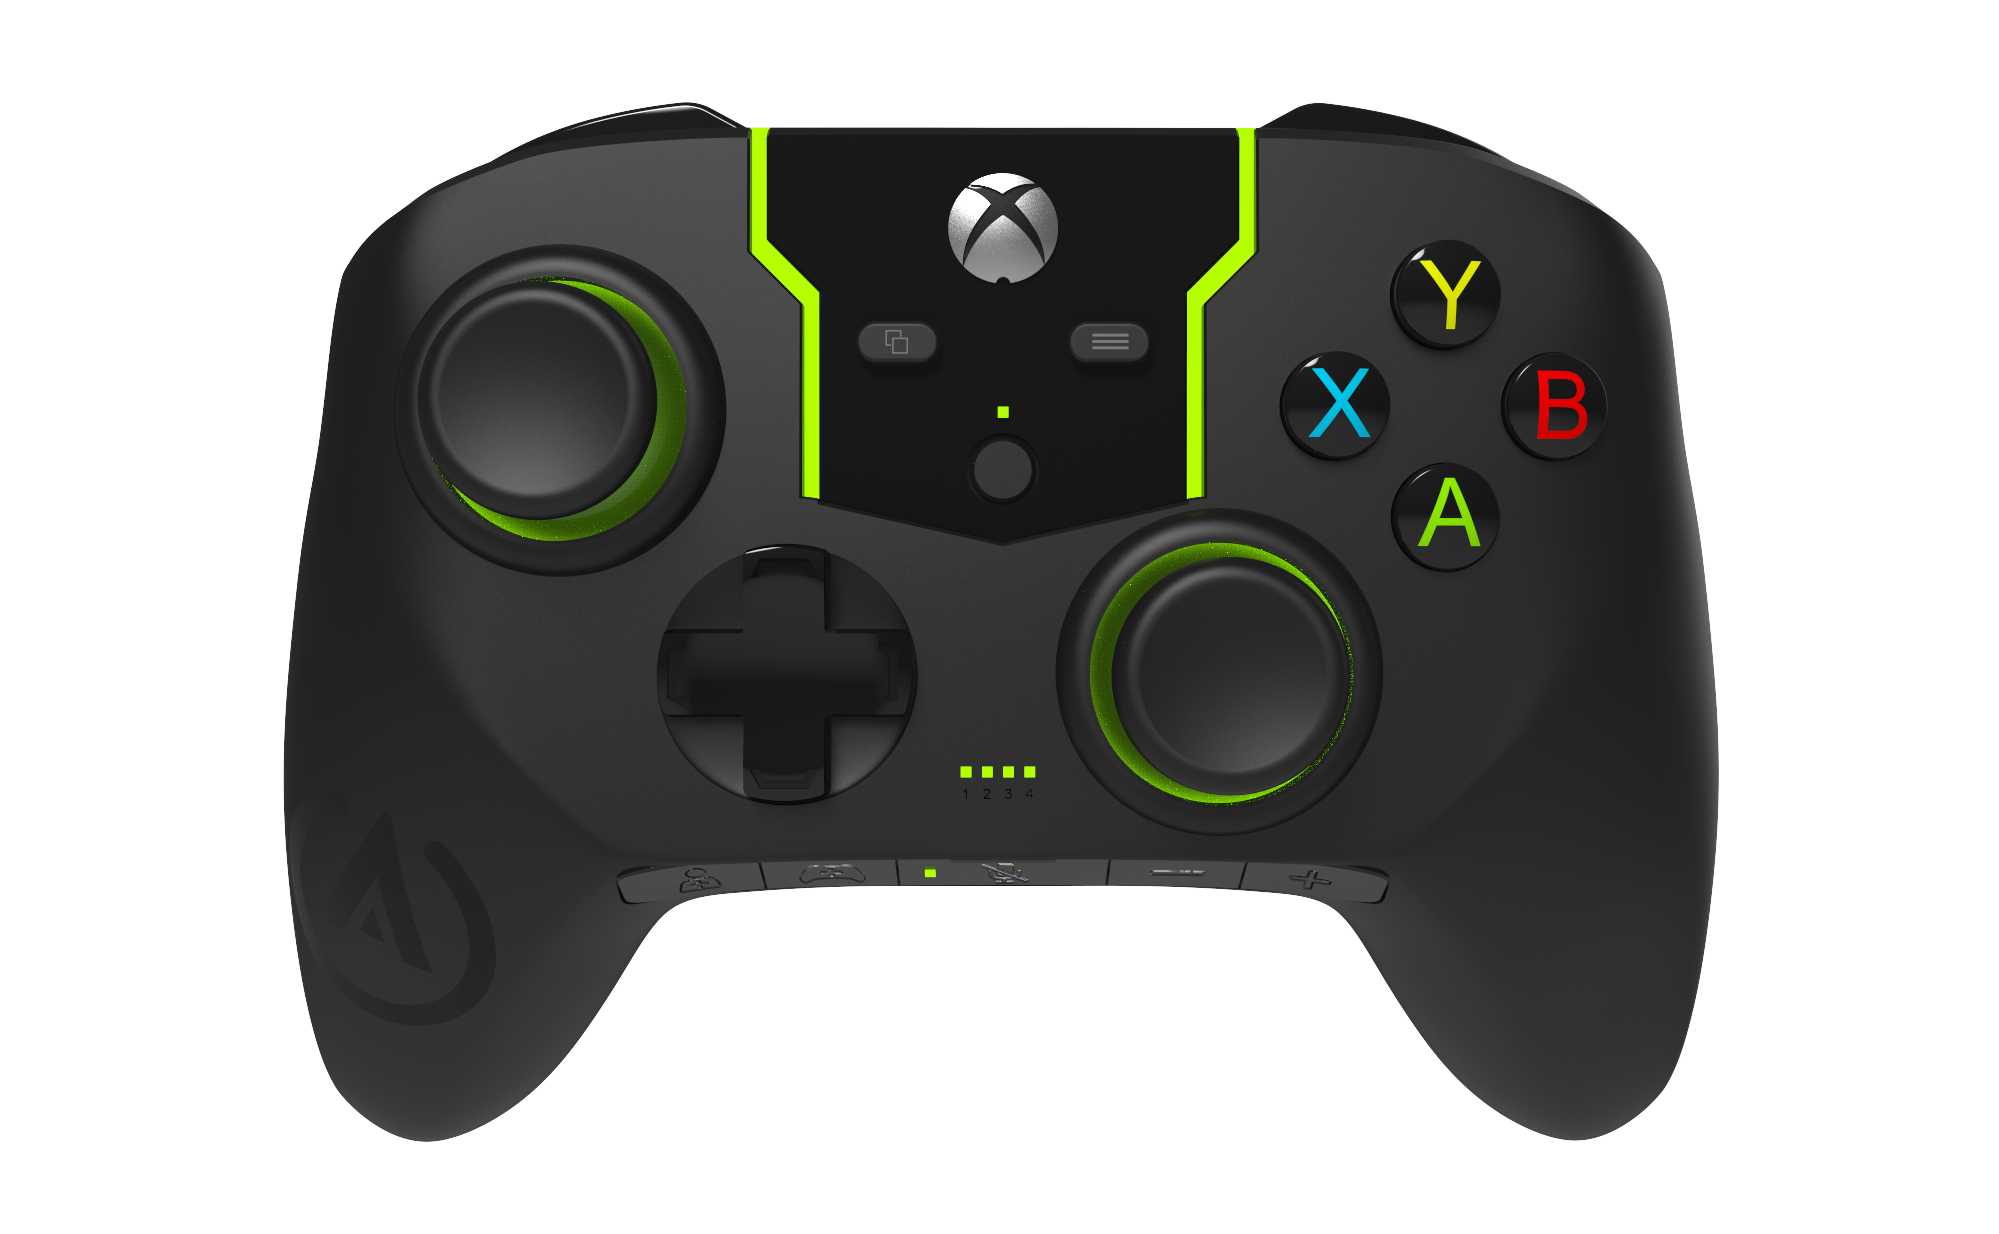  d xbox free. Controller clipart technology